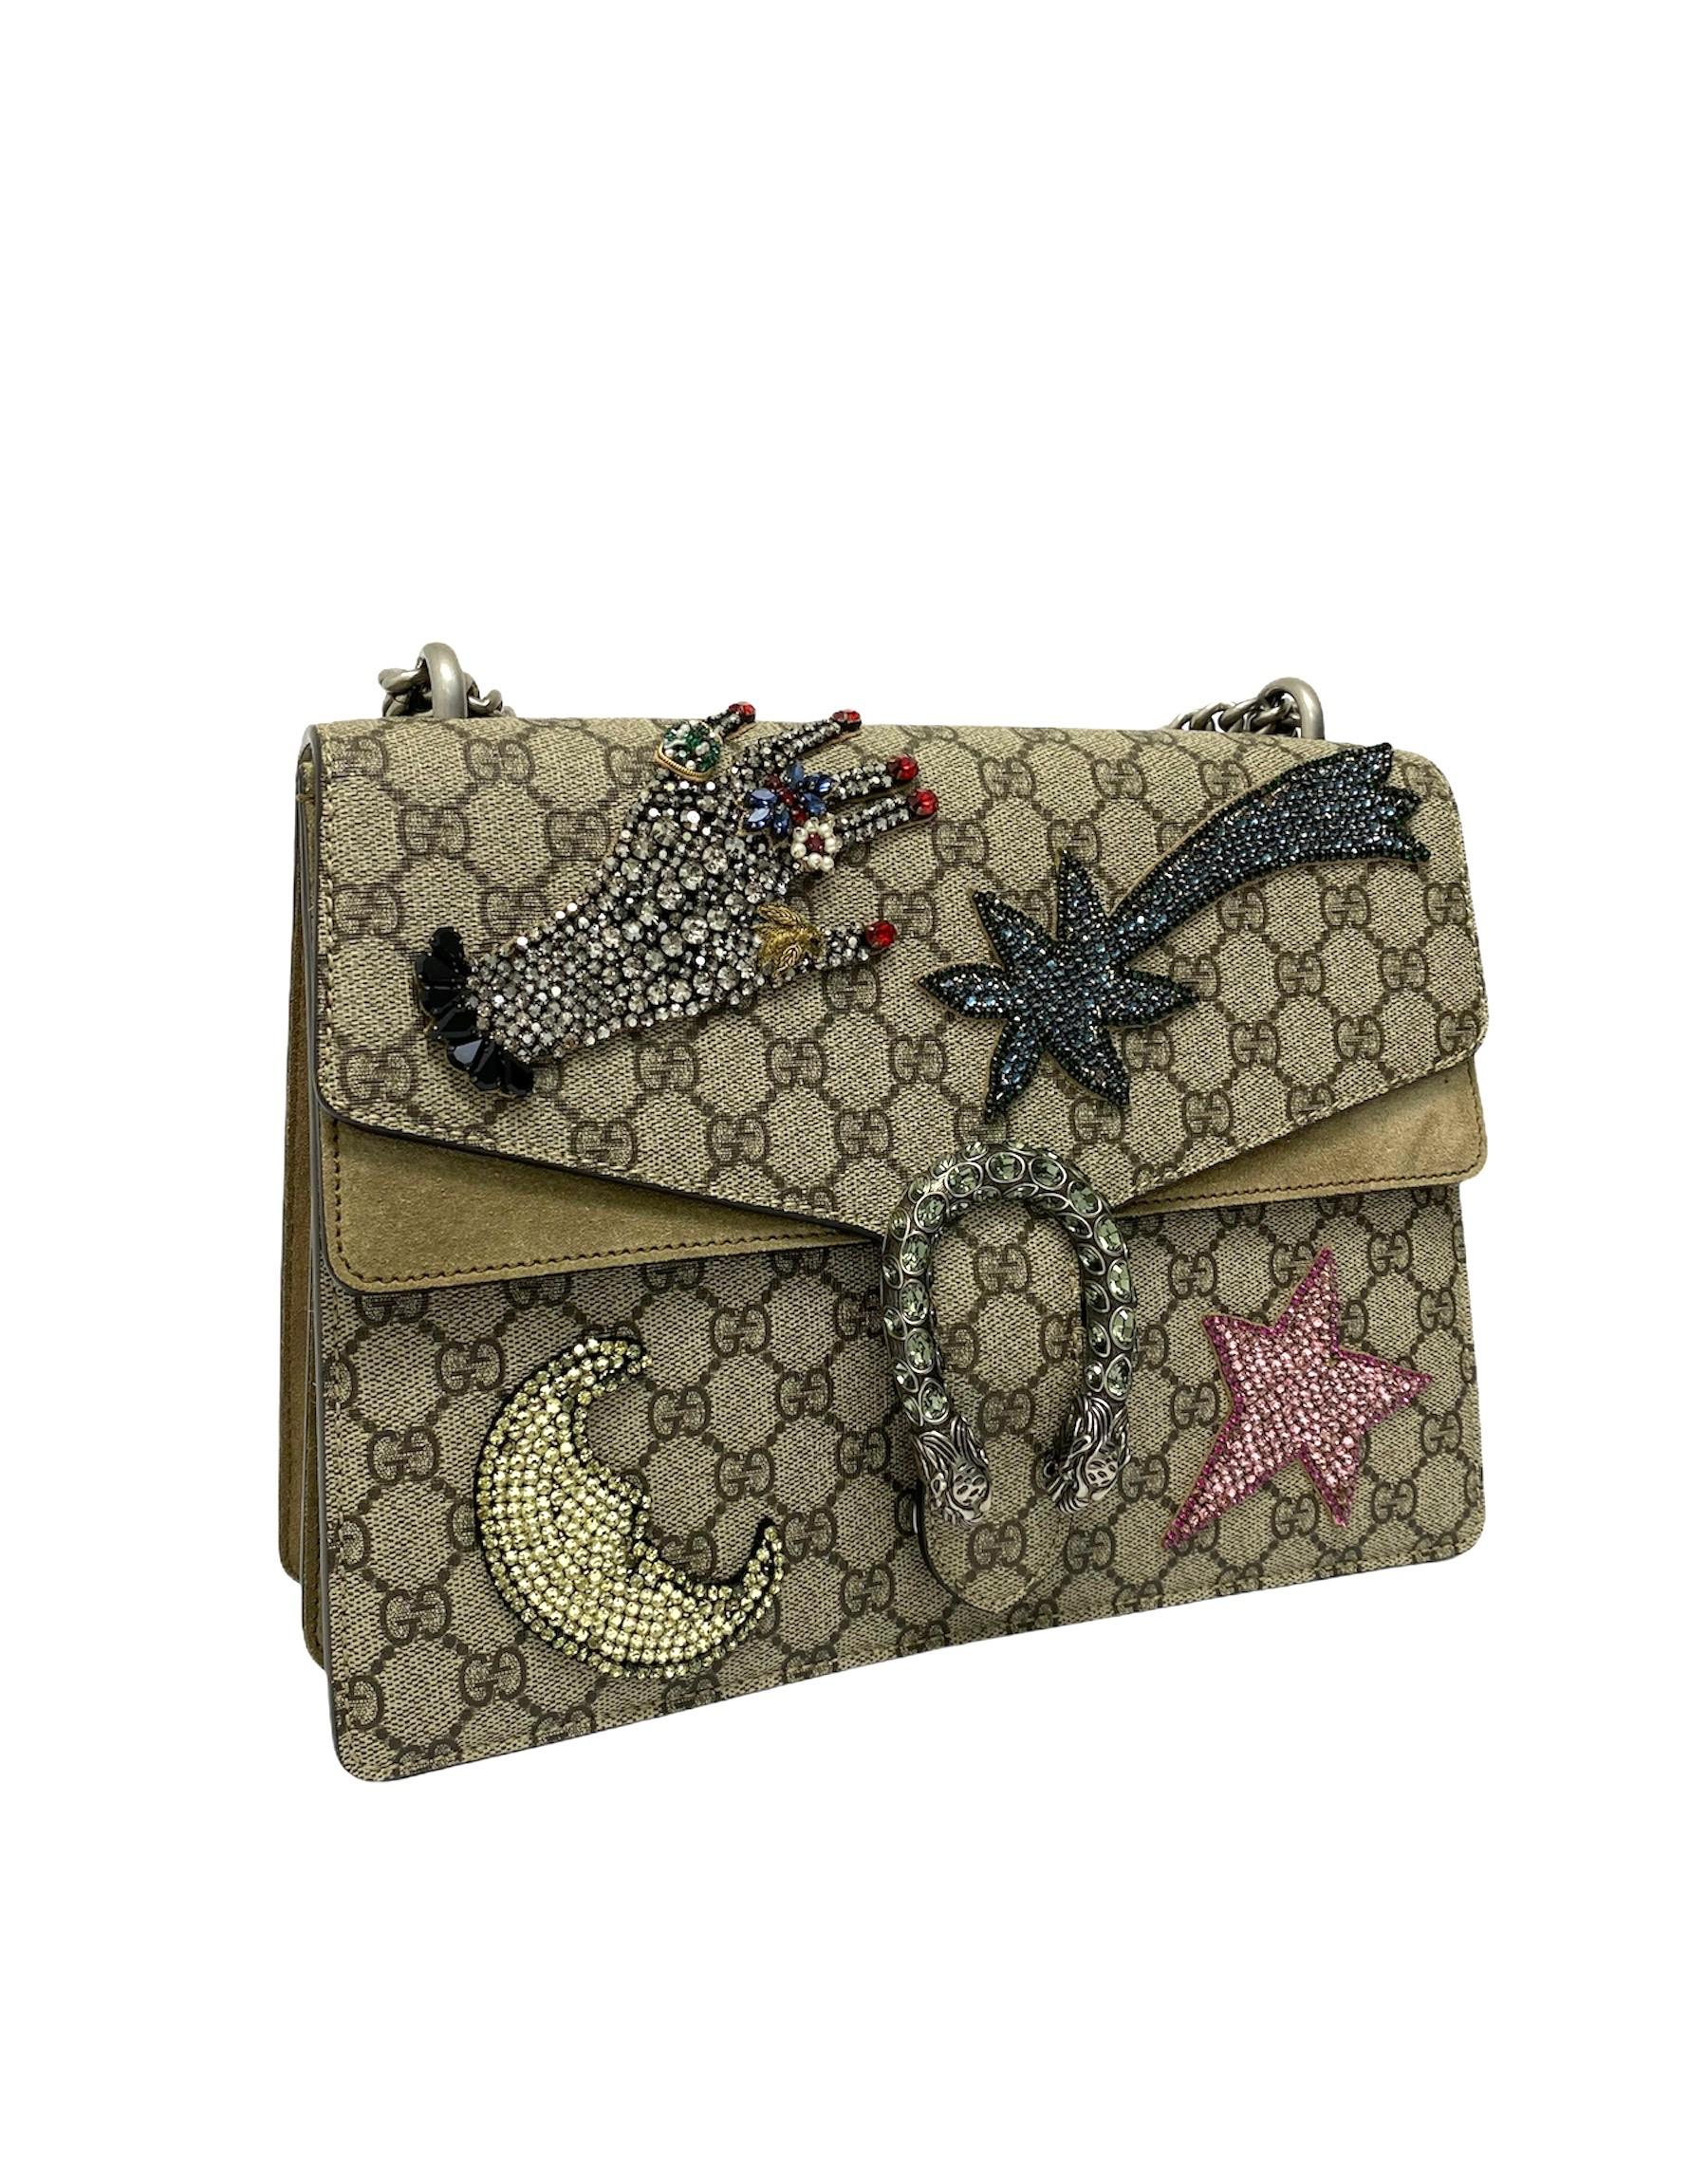 Gucci bag, Dionysus model, made of GG Supreme fabric with beige suede inserts and silver hardware. Equipped with an interlocking closure, internally lined in beige suede, very roomy. Equipped with a sliding chain shoulder strap, a back pocket